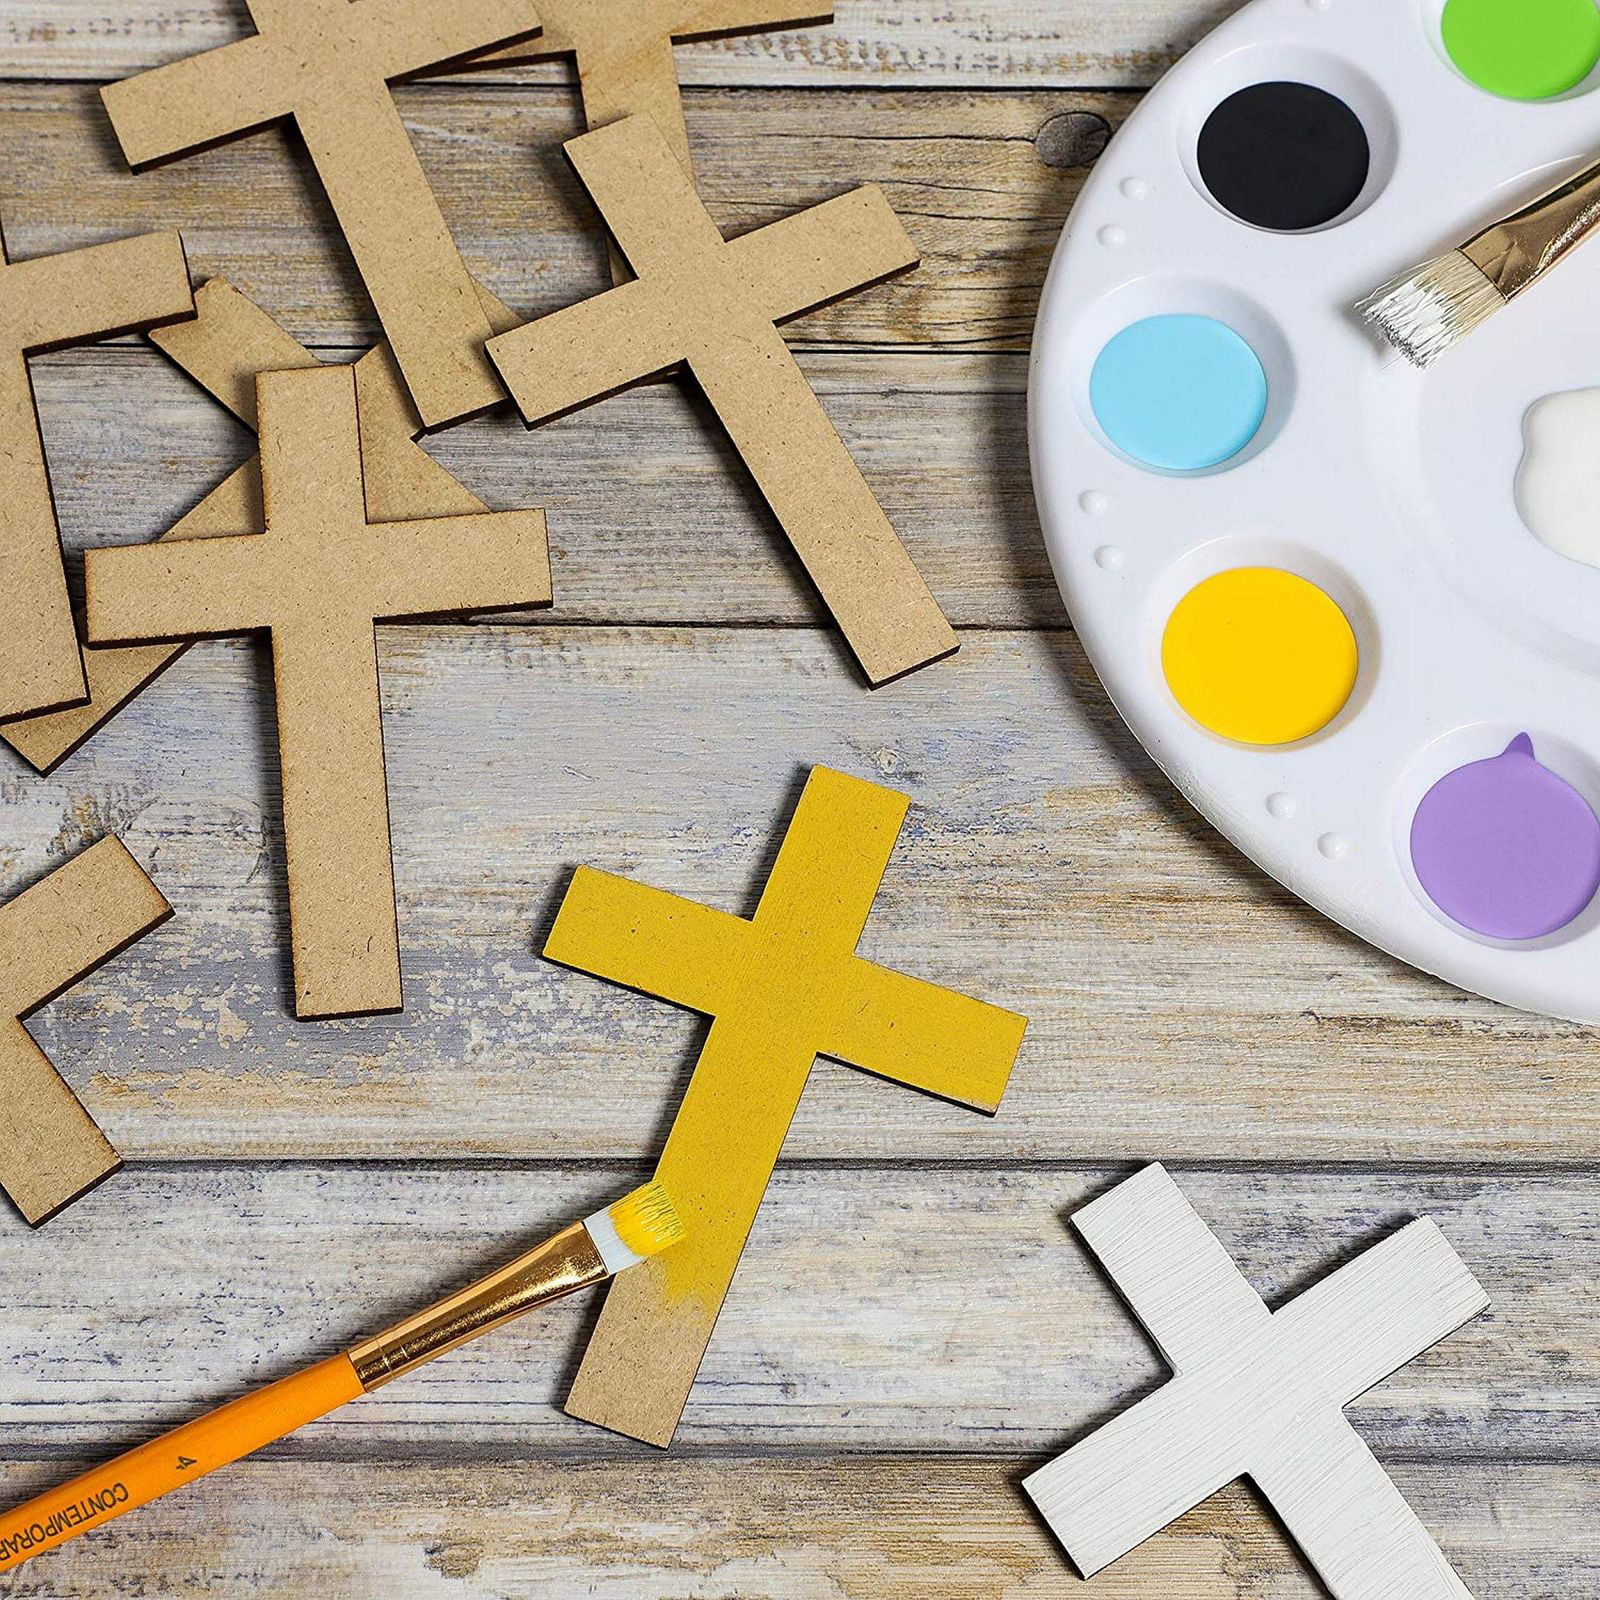 Bright Creations 100-Pack Unfinished MDF Wood Cross Cutouts for DIY Crafts Painting 2.5 x 3.5 Inches